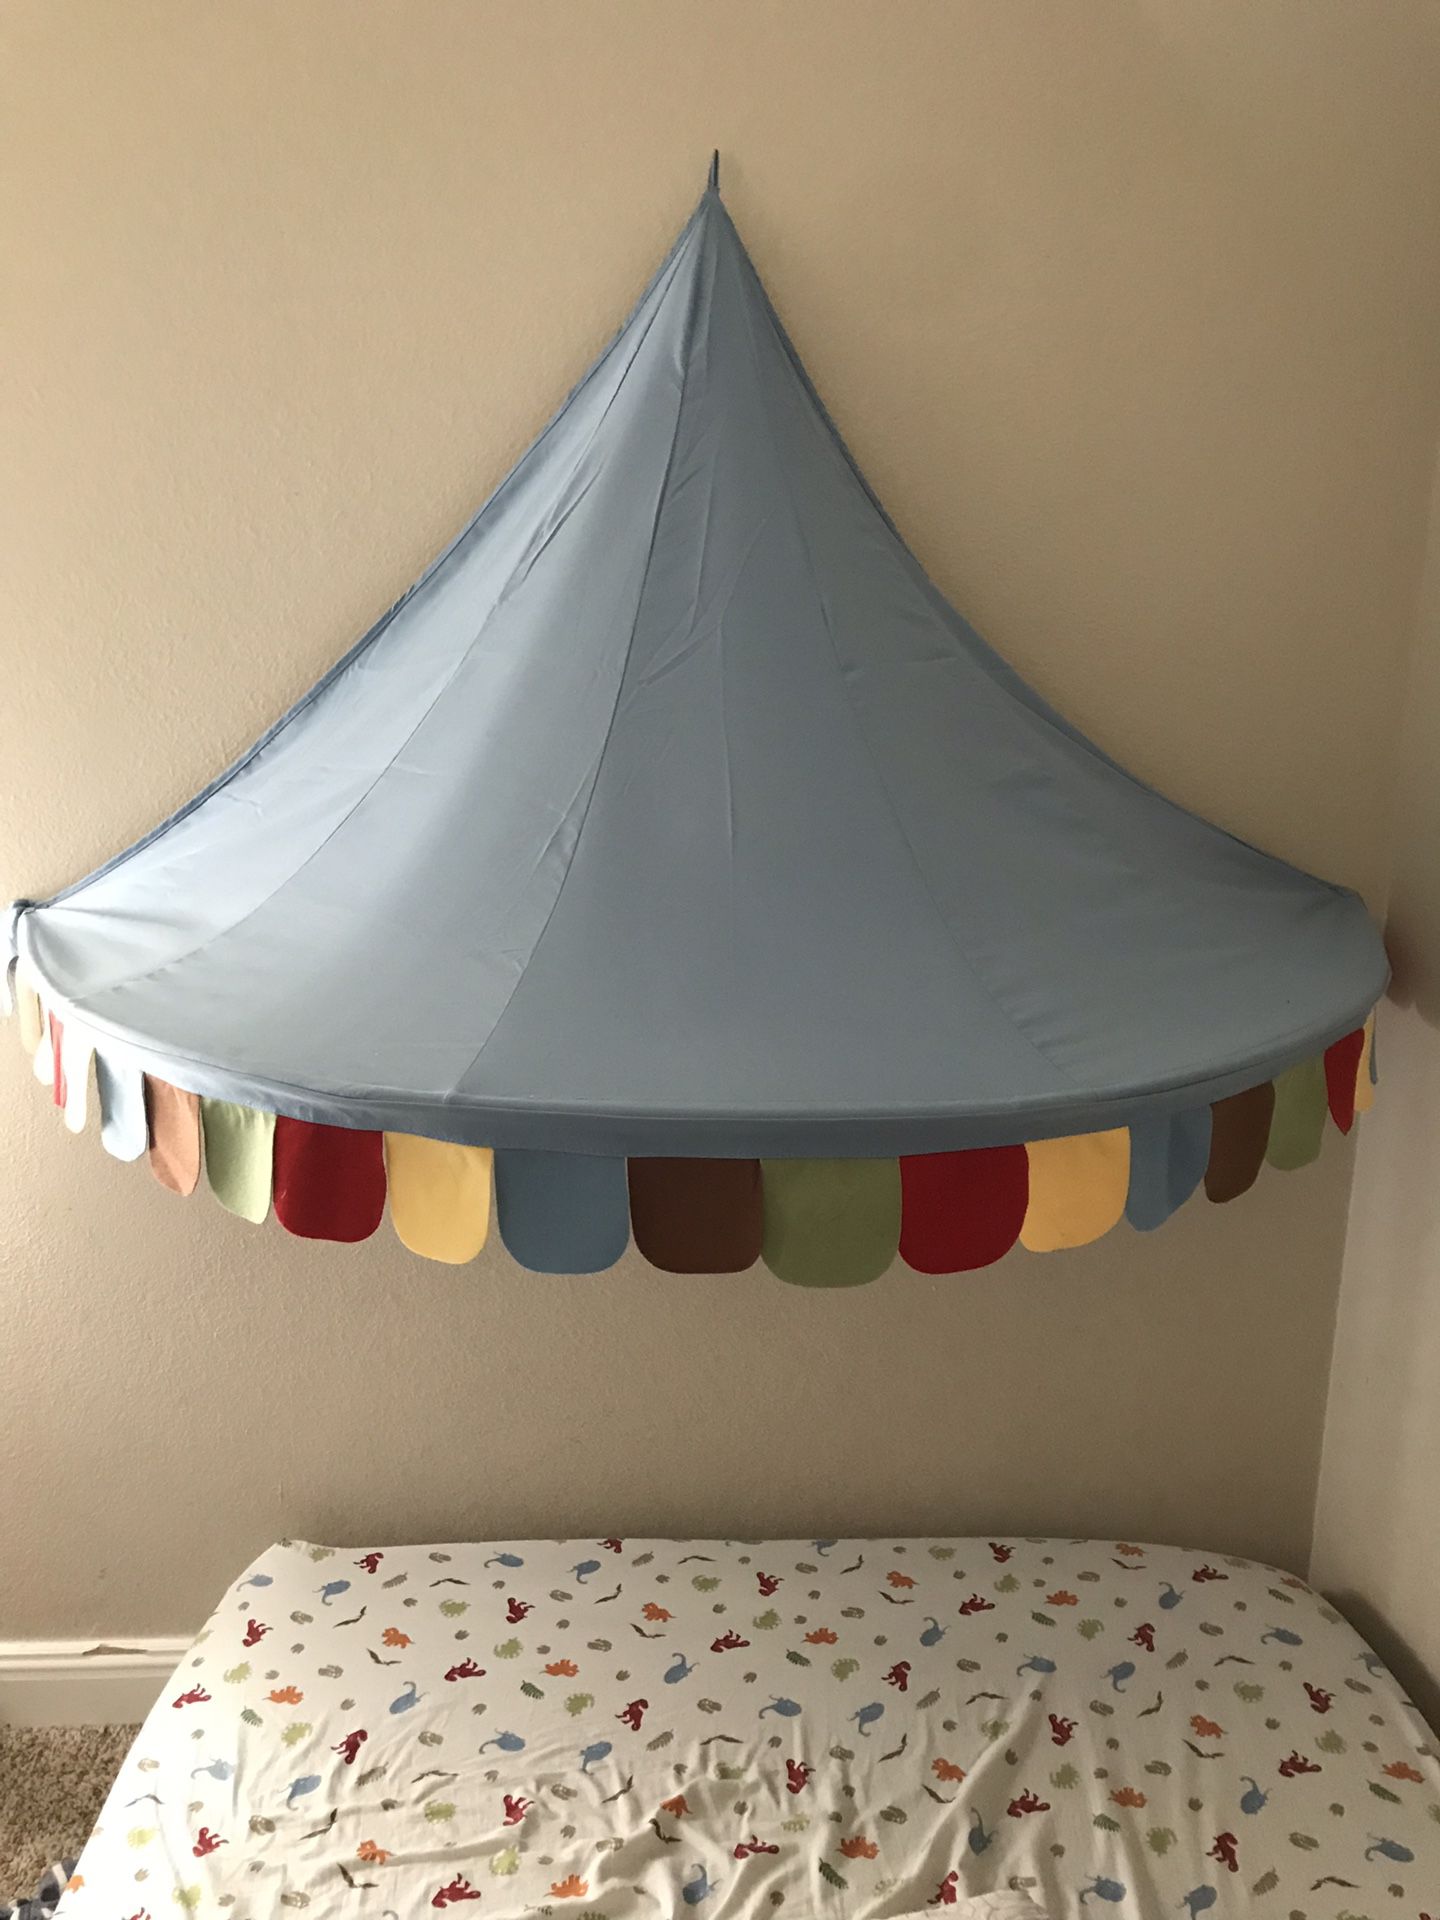 Kids bedroom/toy-room canopy from Ikea